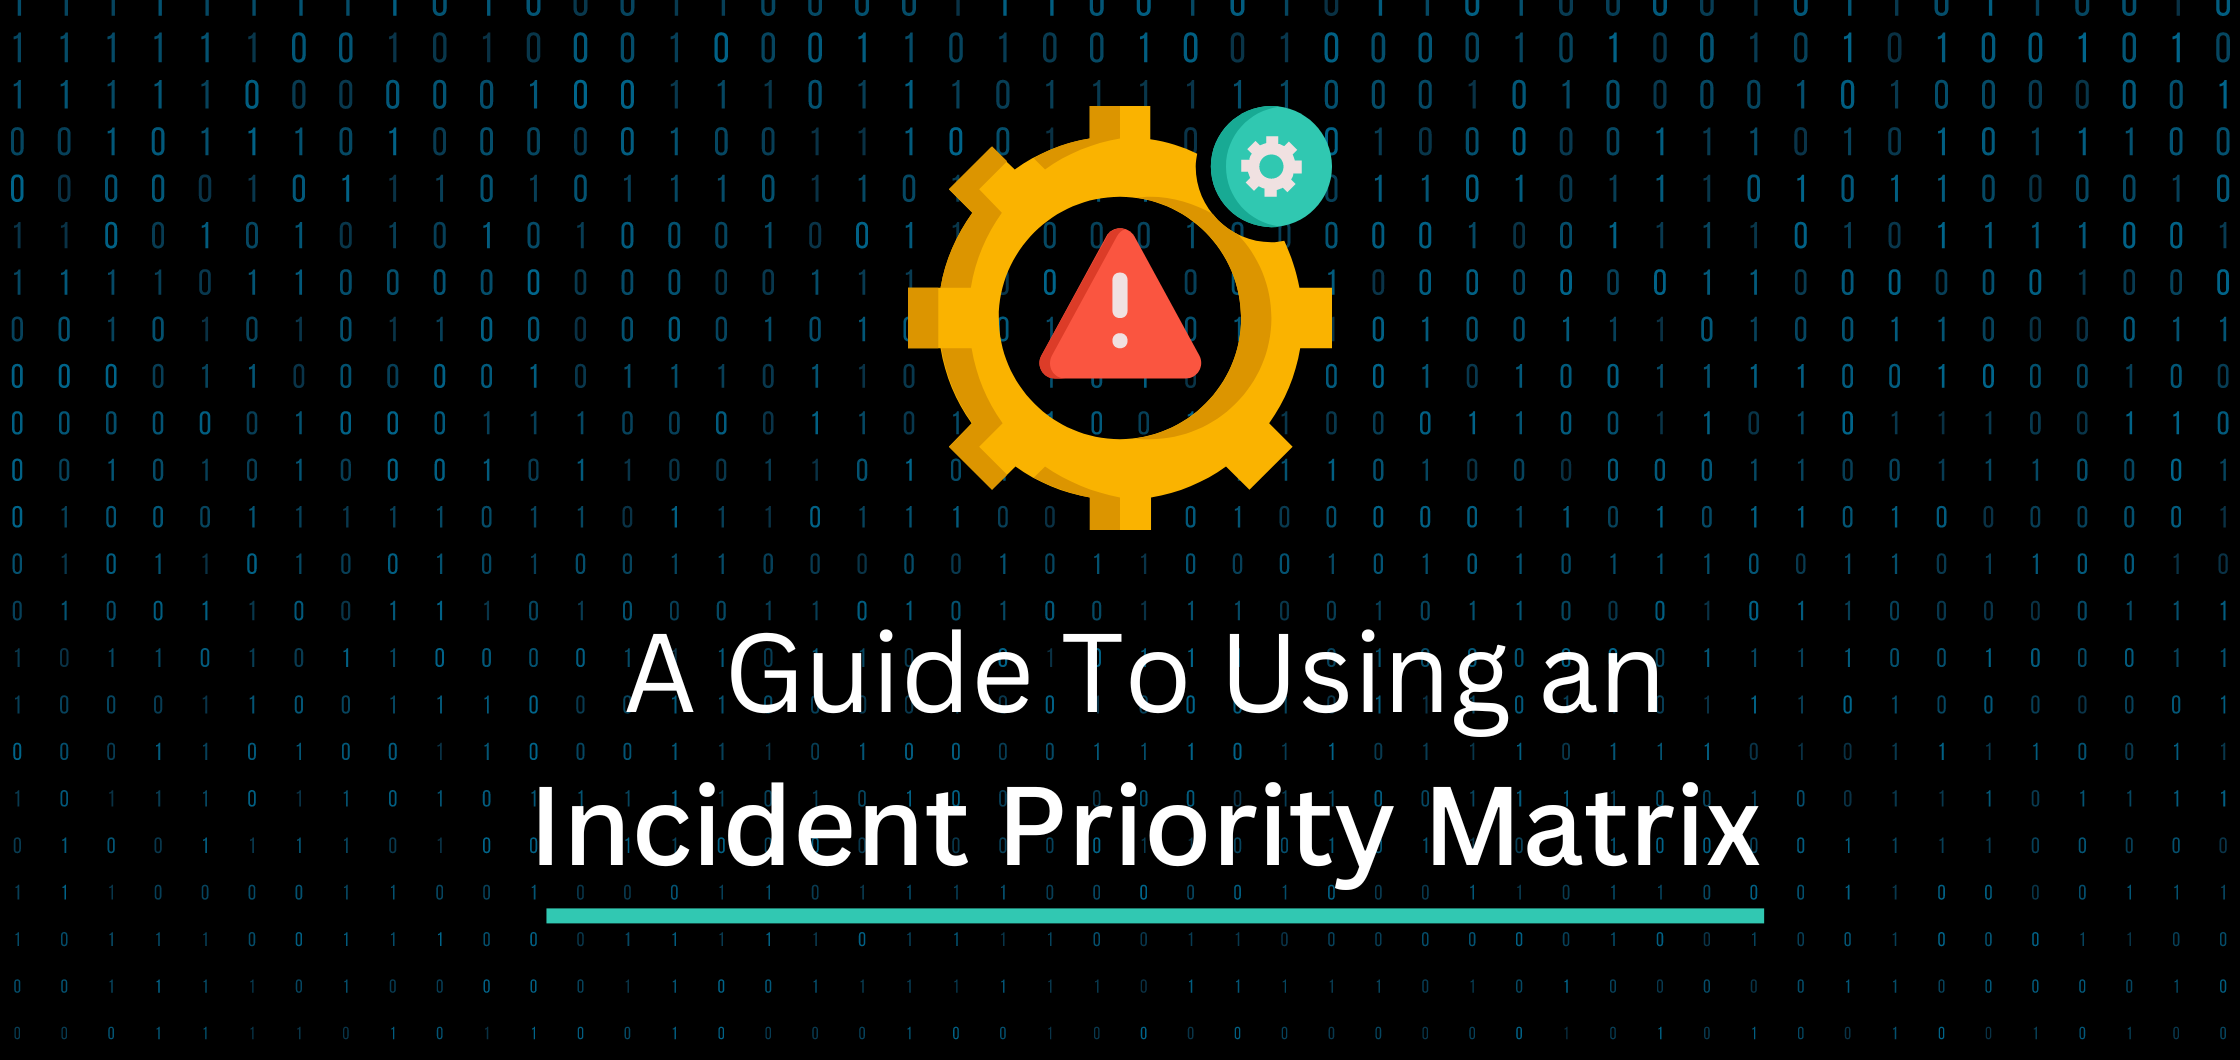 Incident Priority Matrix: From Chaos to Clarity